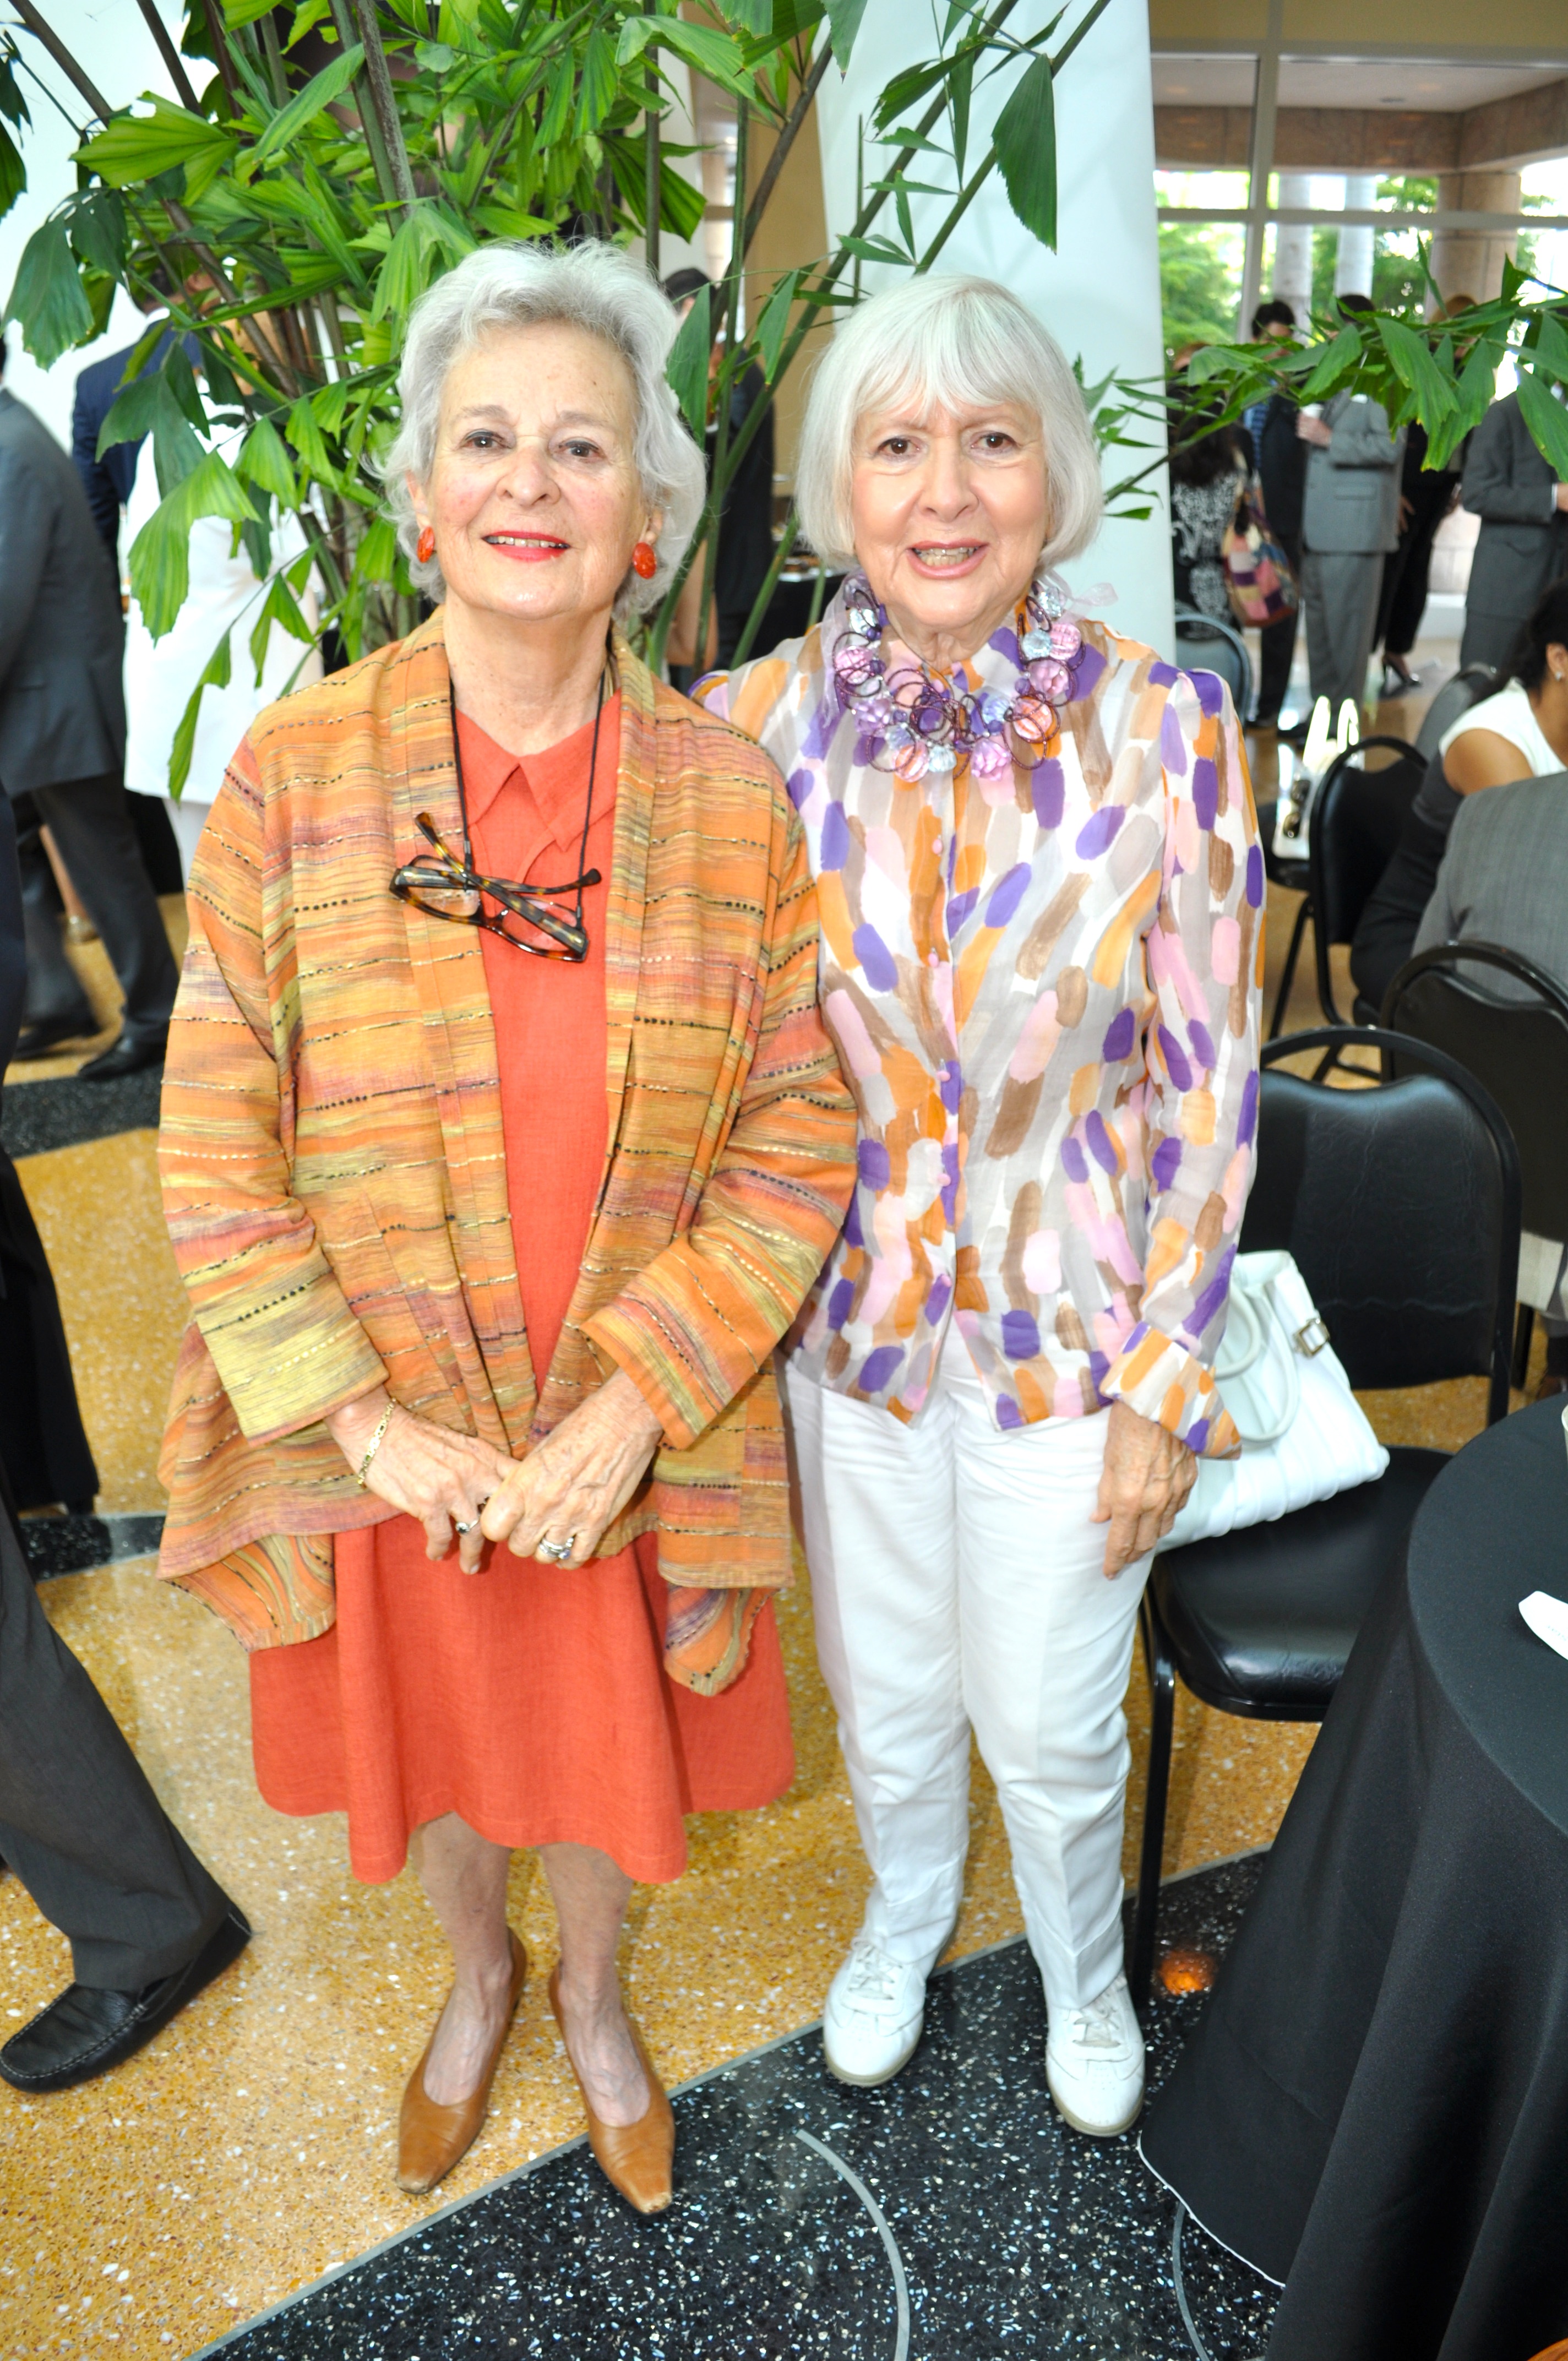 Ruth W. Greenfield and Diane Star Heller at the Arsht Center.